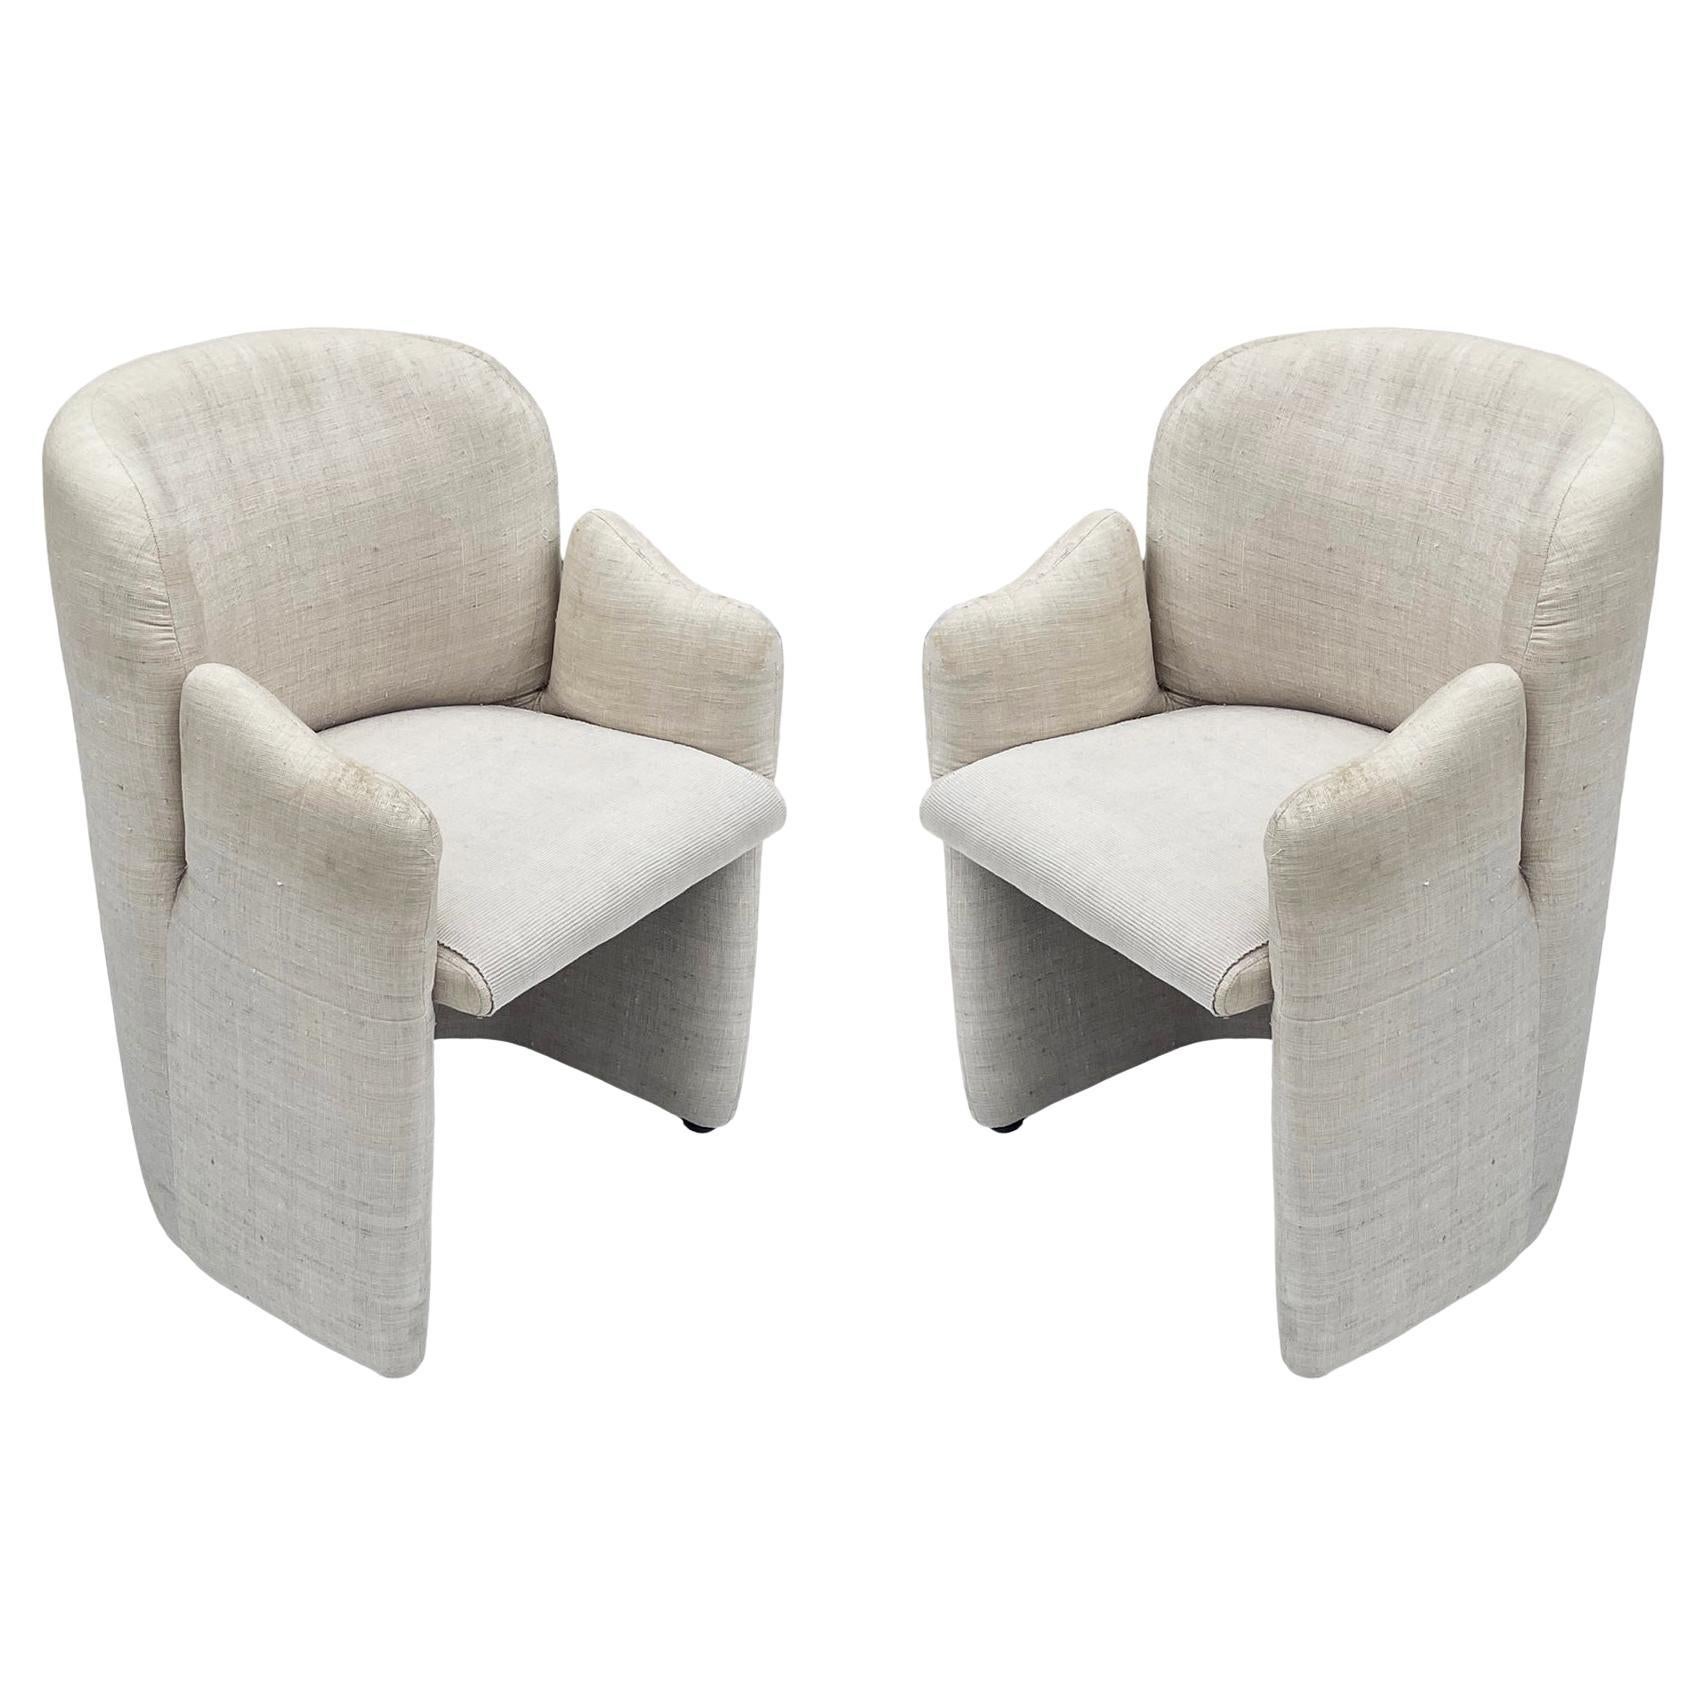 Matching Pair of Mid-Century Modern Upholstered Armchairs or Lounge Chairs